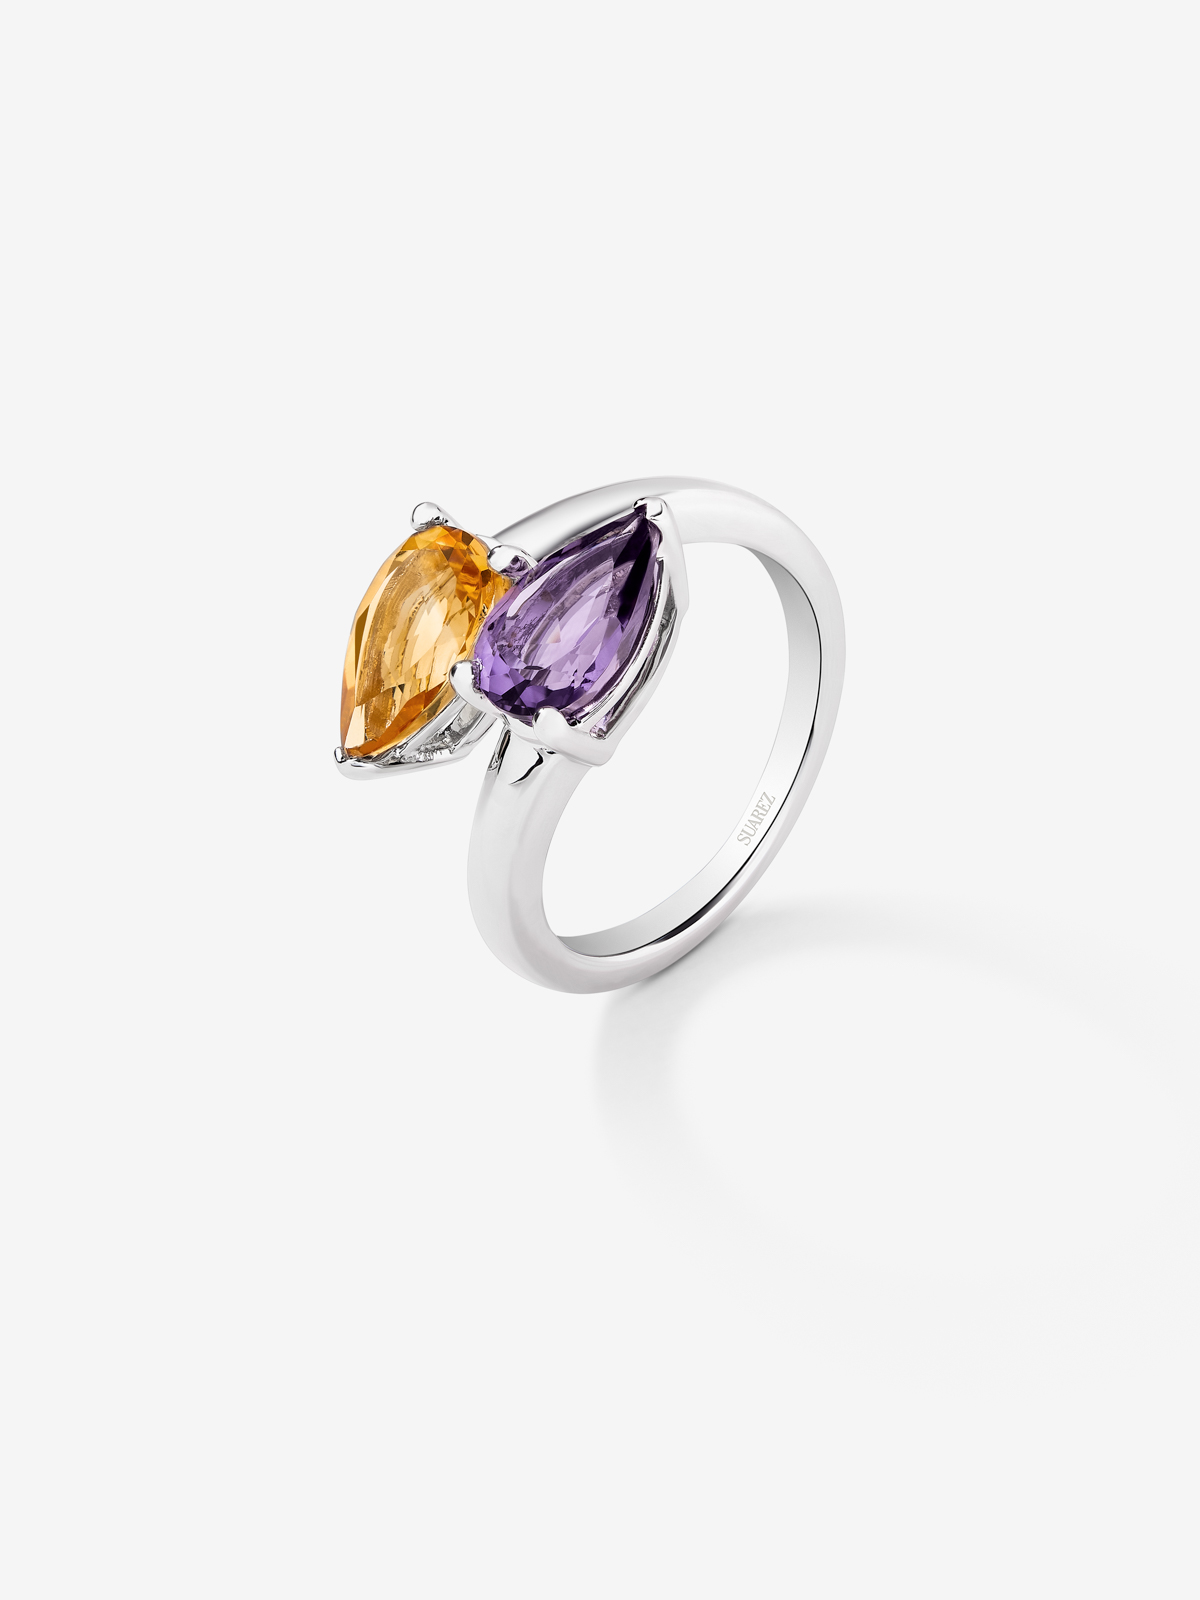 Tu and I of 925 silver ring with 1.32 cts citrine quartz and 1.28 cts purple amethyst